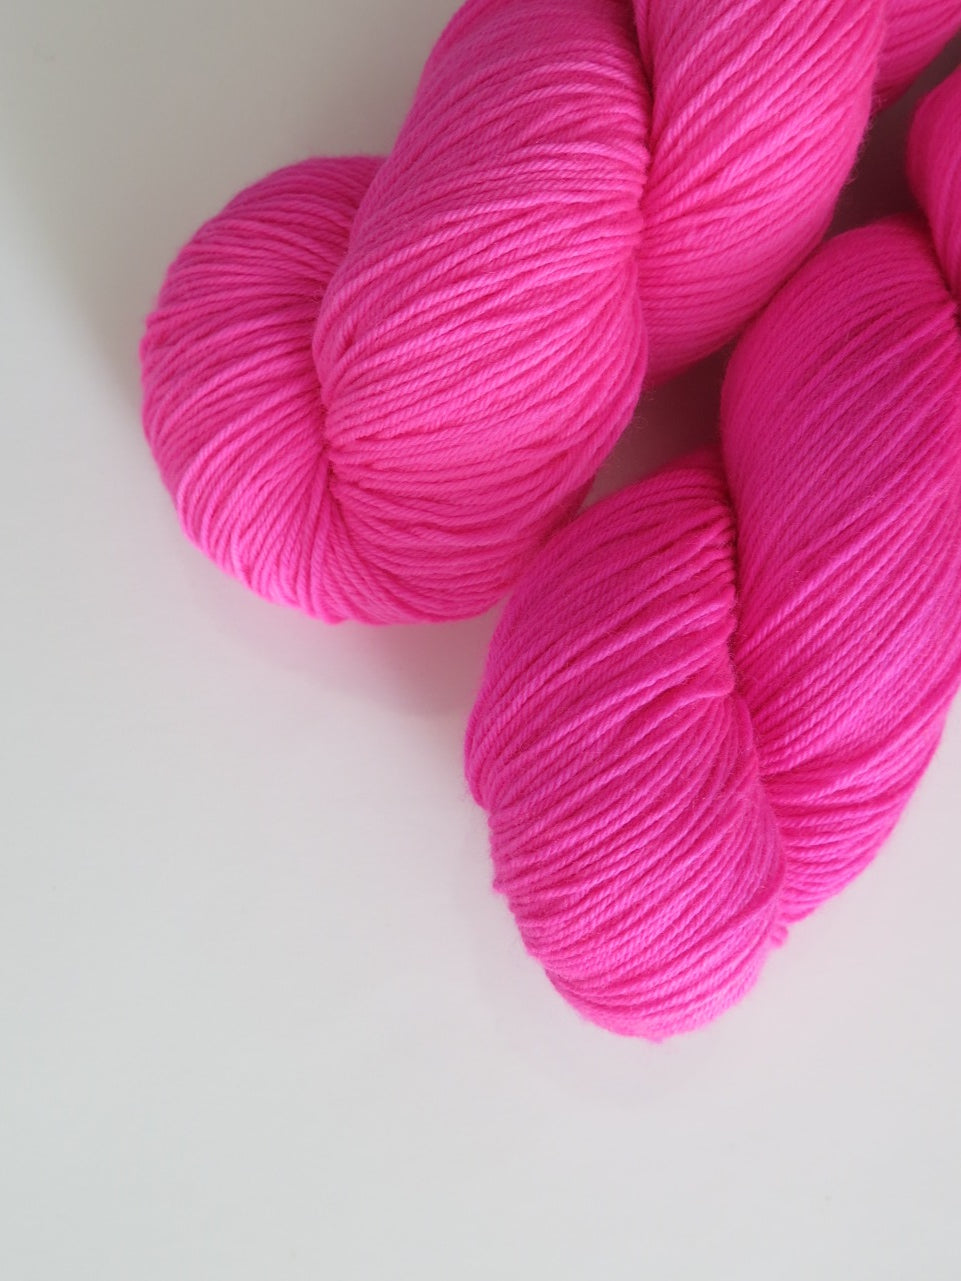 neon pink yarn skein for knitting and crochet